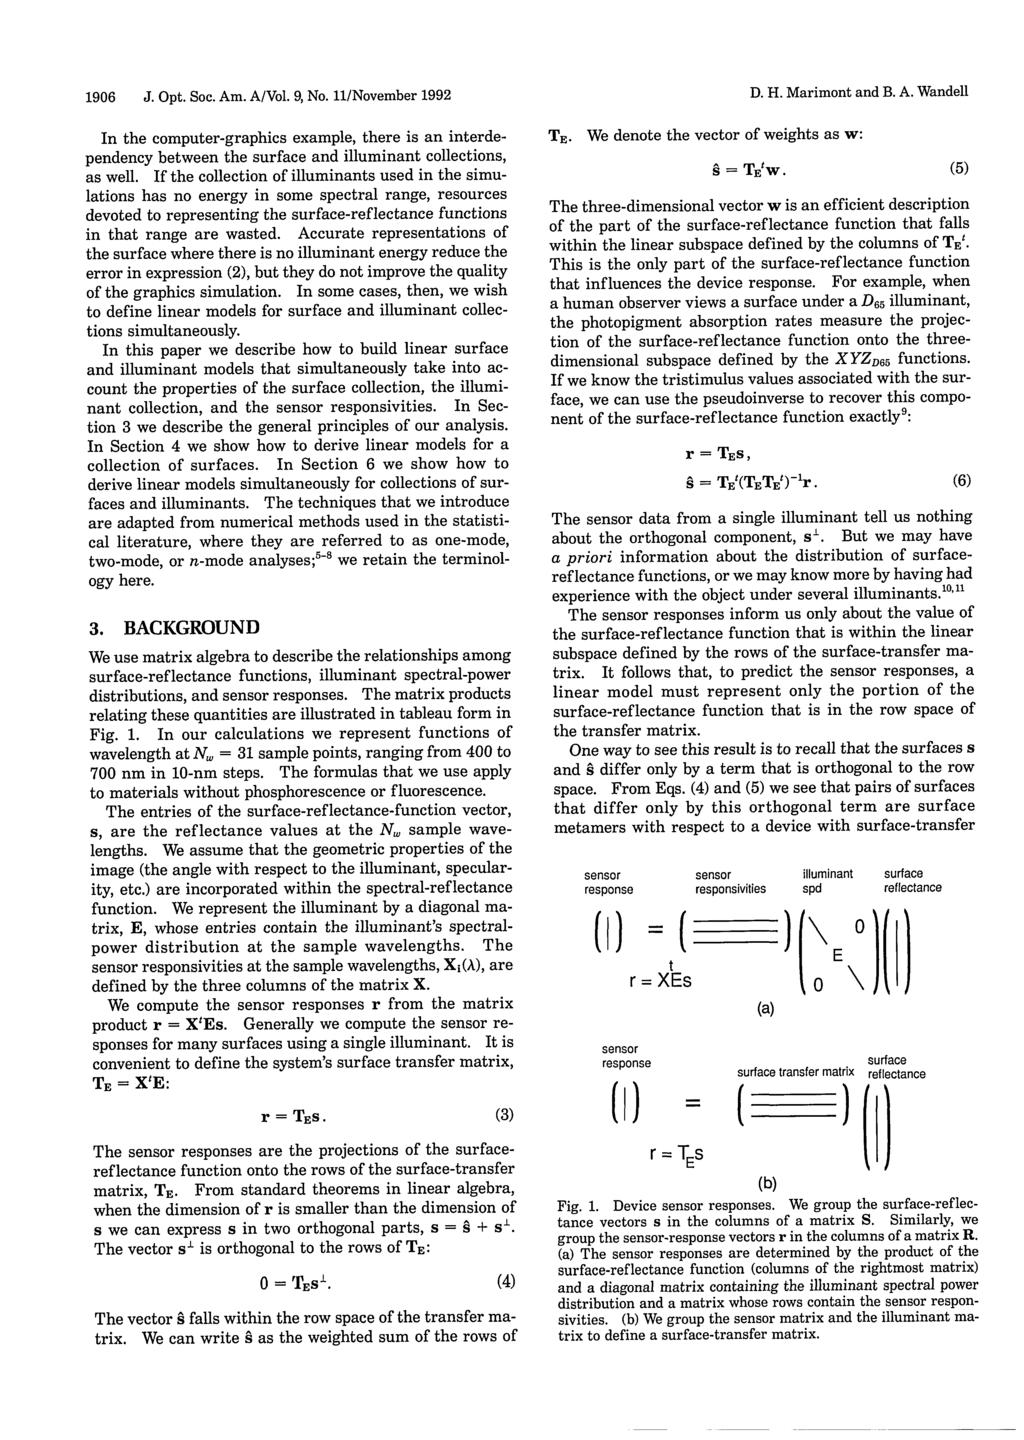 1906 J. Opt. Soc. Am. A/Vol. 9, No. 11/November 1992 In the computer-graphics example, there is an interdependency between the surface and illuminant collections, as well.